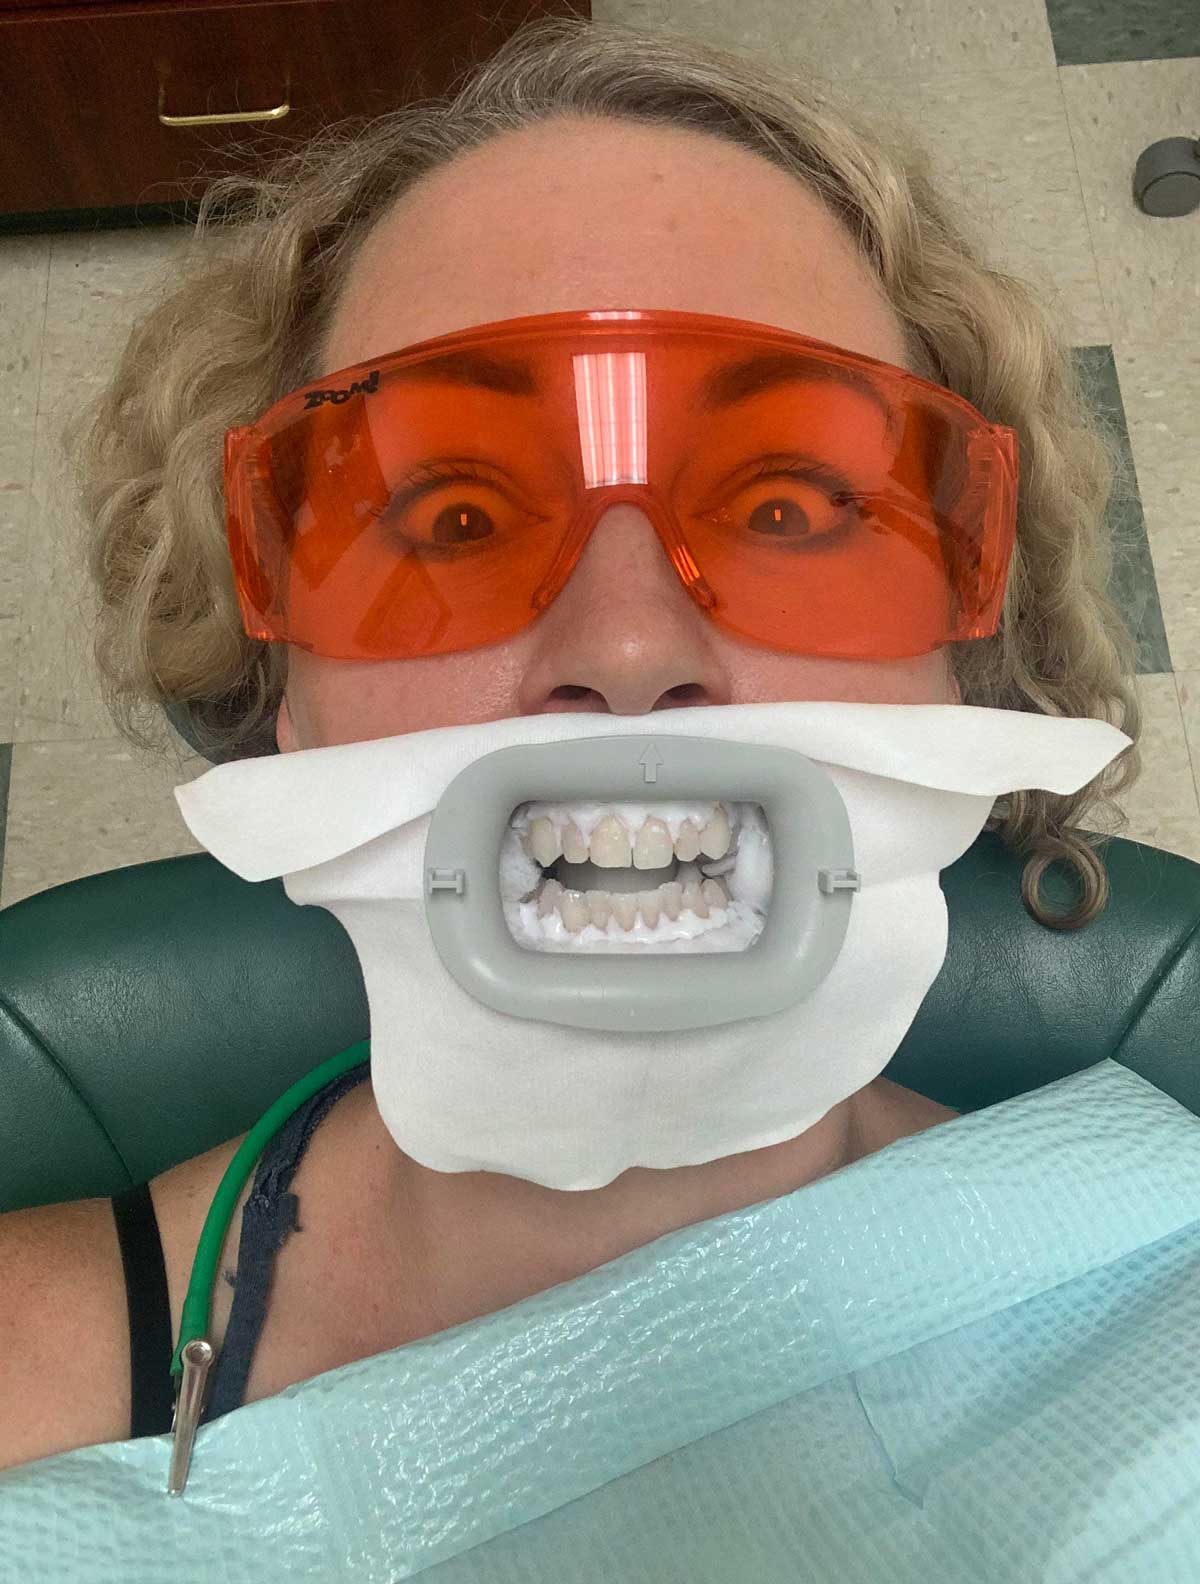 The pic my mom sent me at the dentist